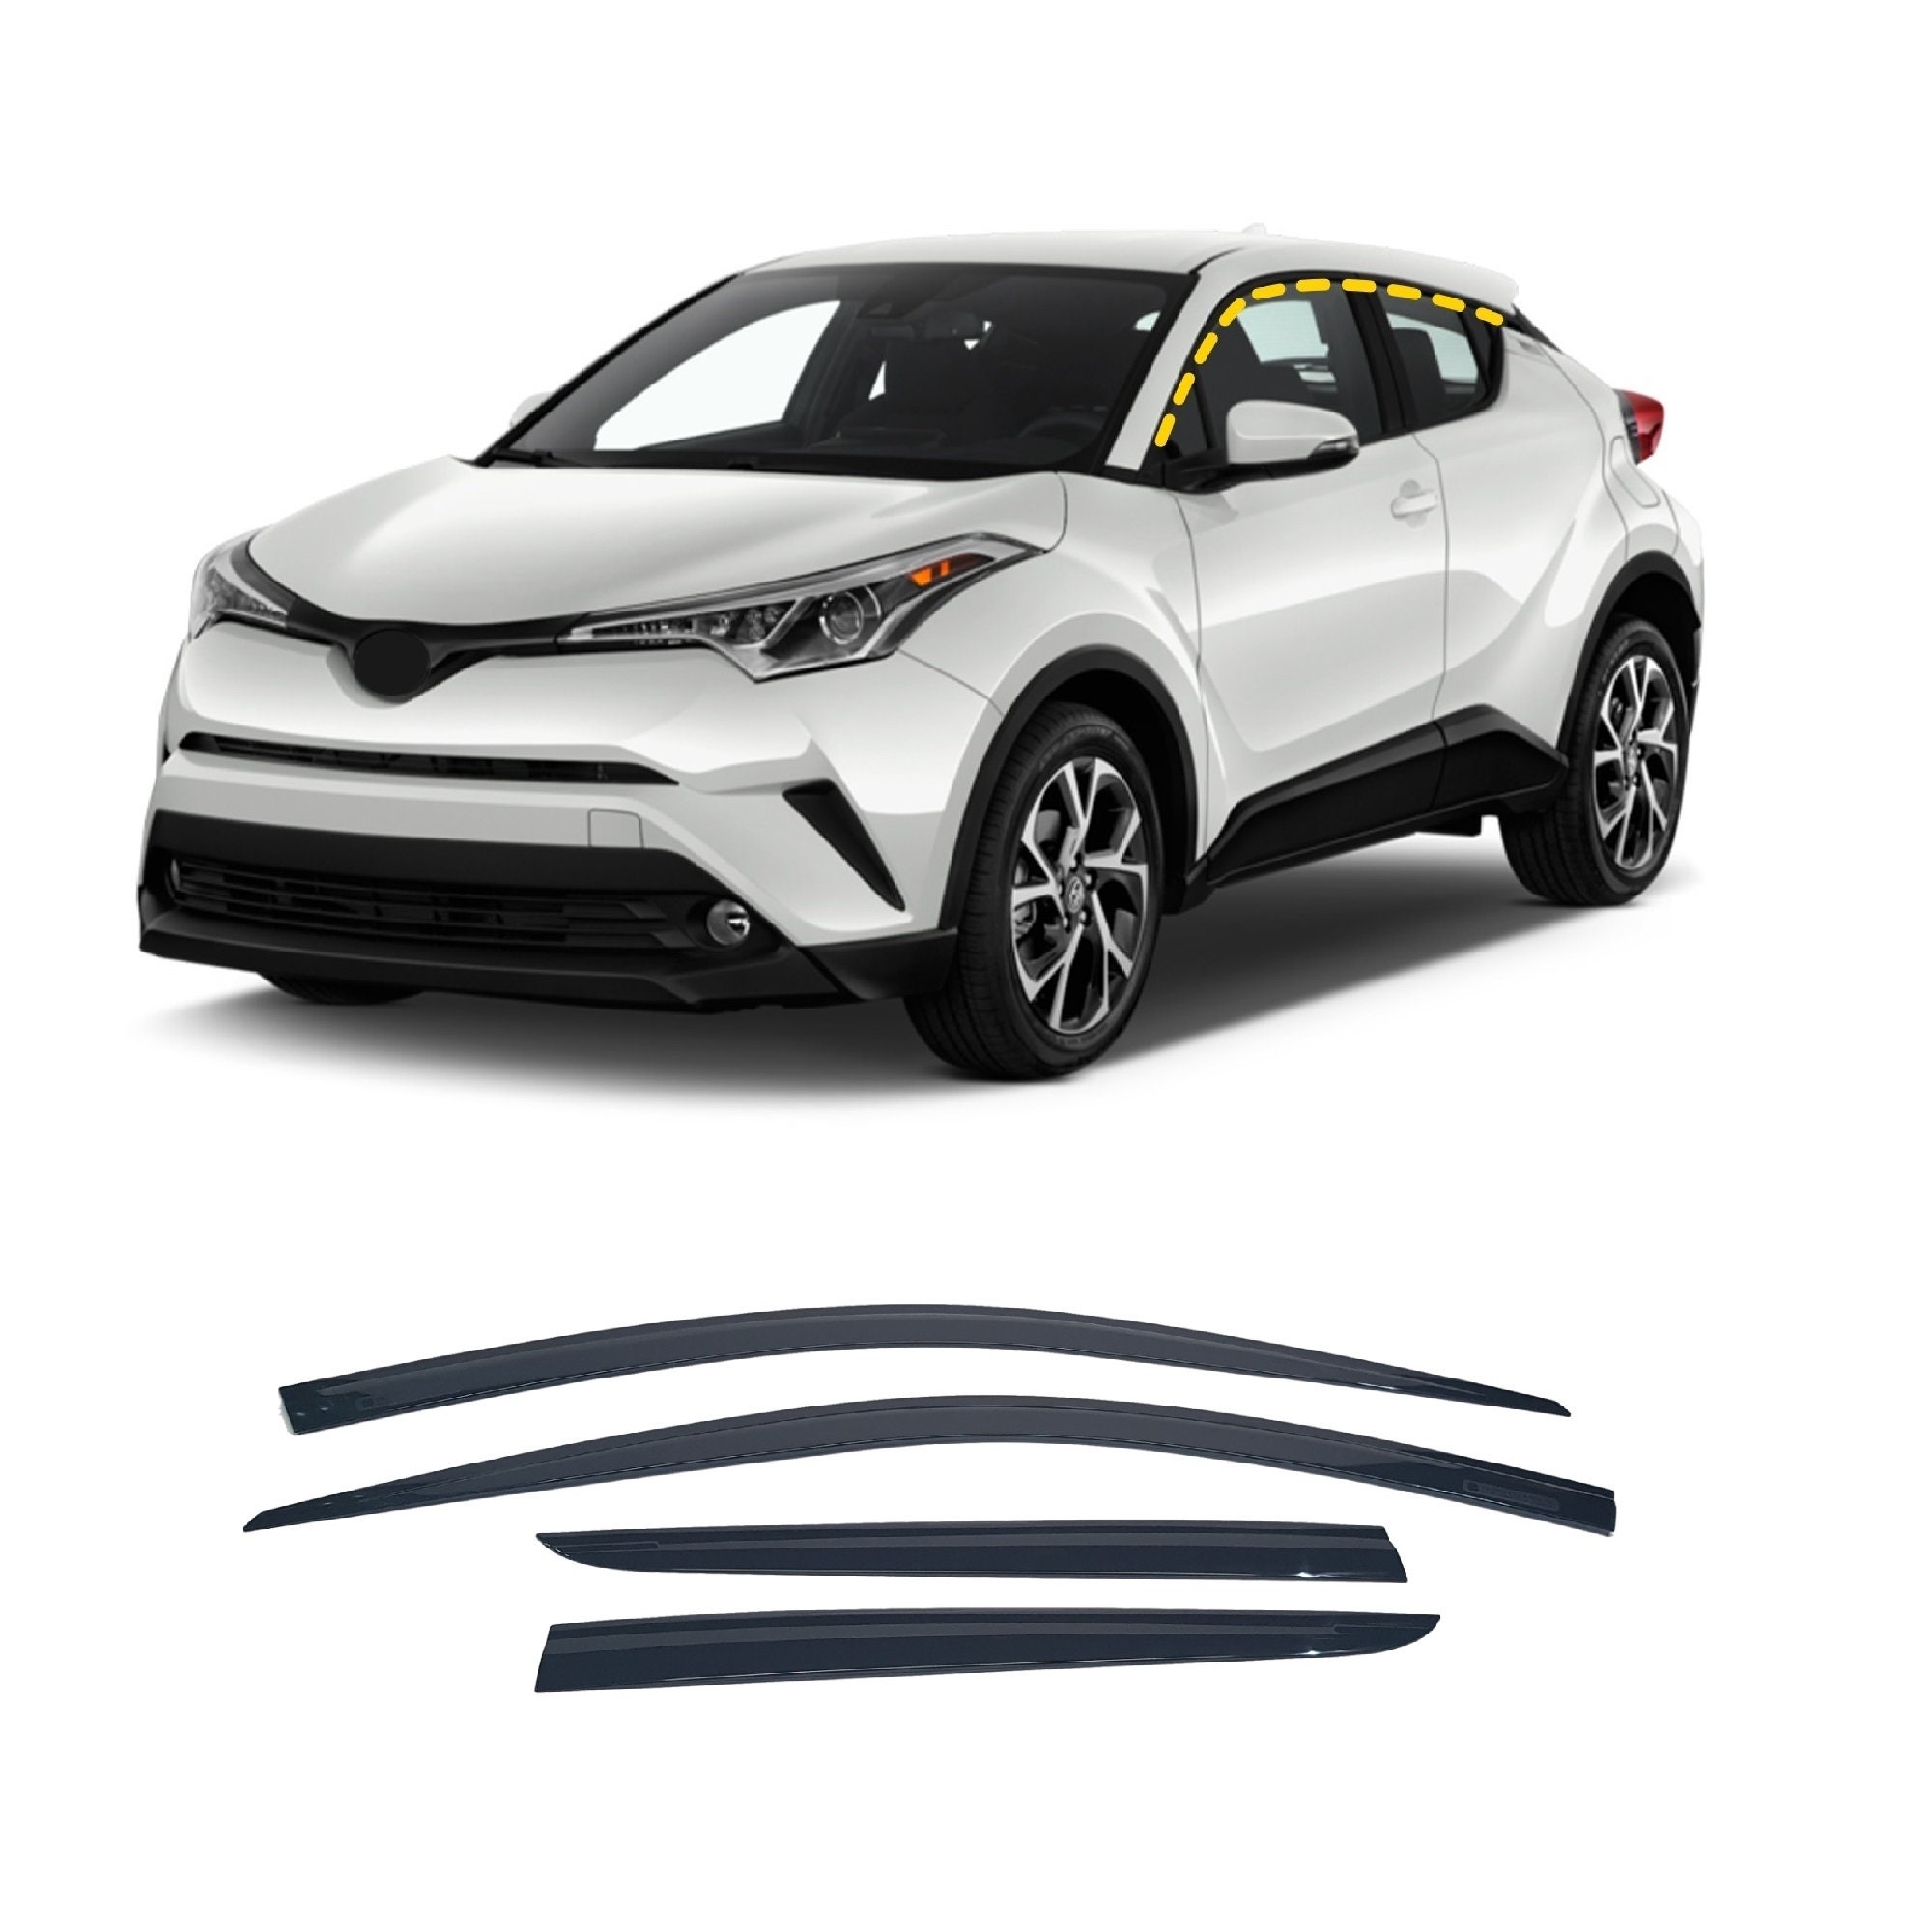 Toyota C-HR 2016 - 2022 side, front & rear Stripes exact factory format  Hexis Suptac 10 year exterior Vinyl Decals Stickers